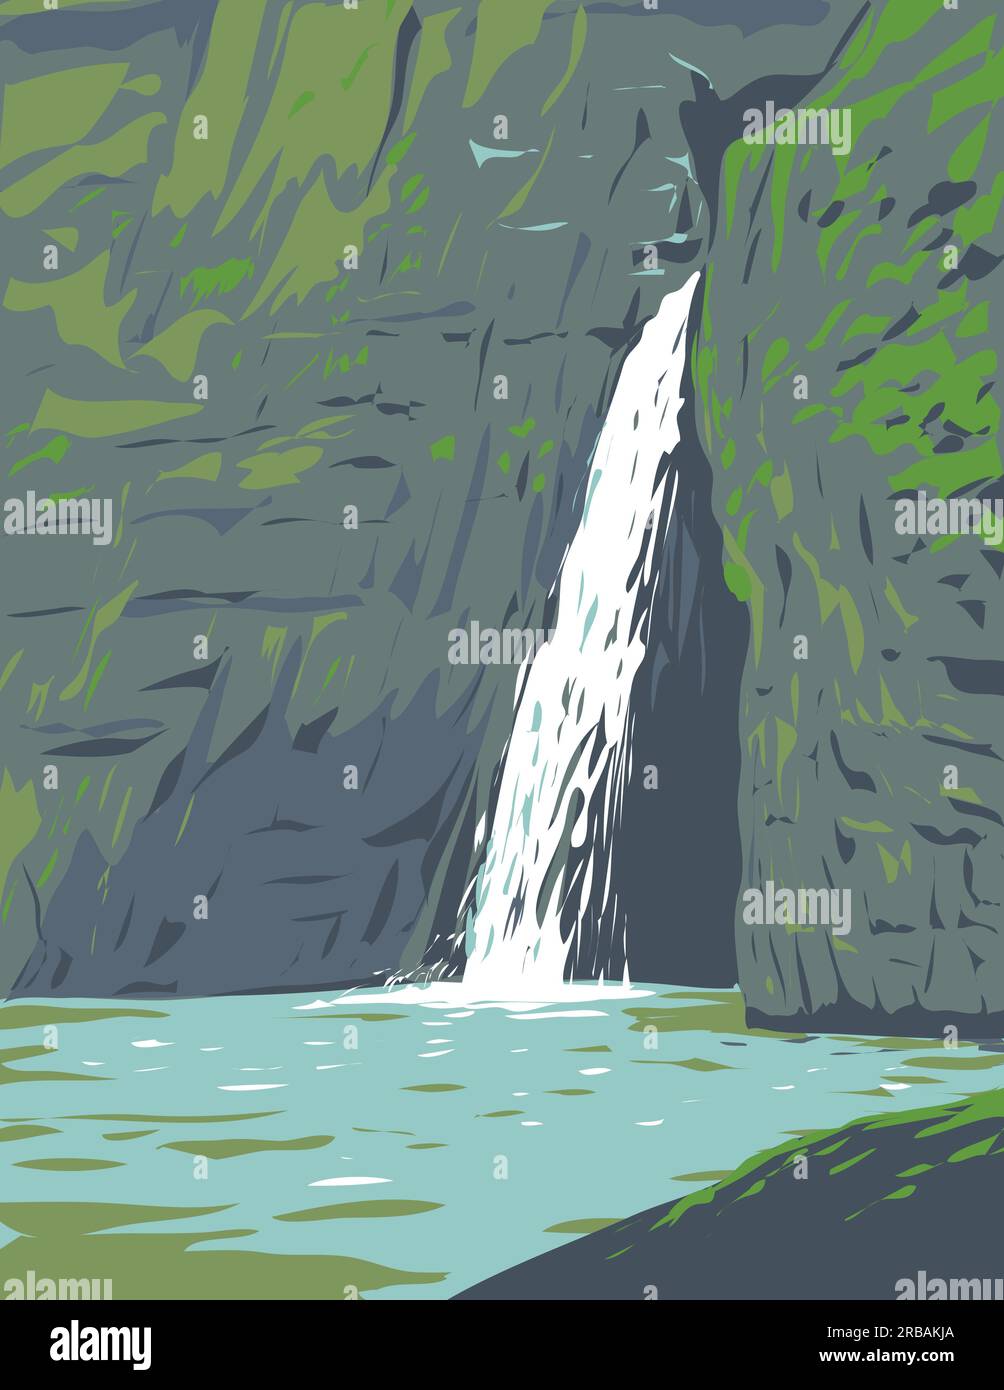 WPA poster art of Pagsanjan Falls, Magdapio Falls or Cavinti Falls waterfall in the province of Laguna in Luzon Island of the Philippines done in work Stock Photo